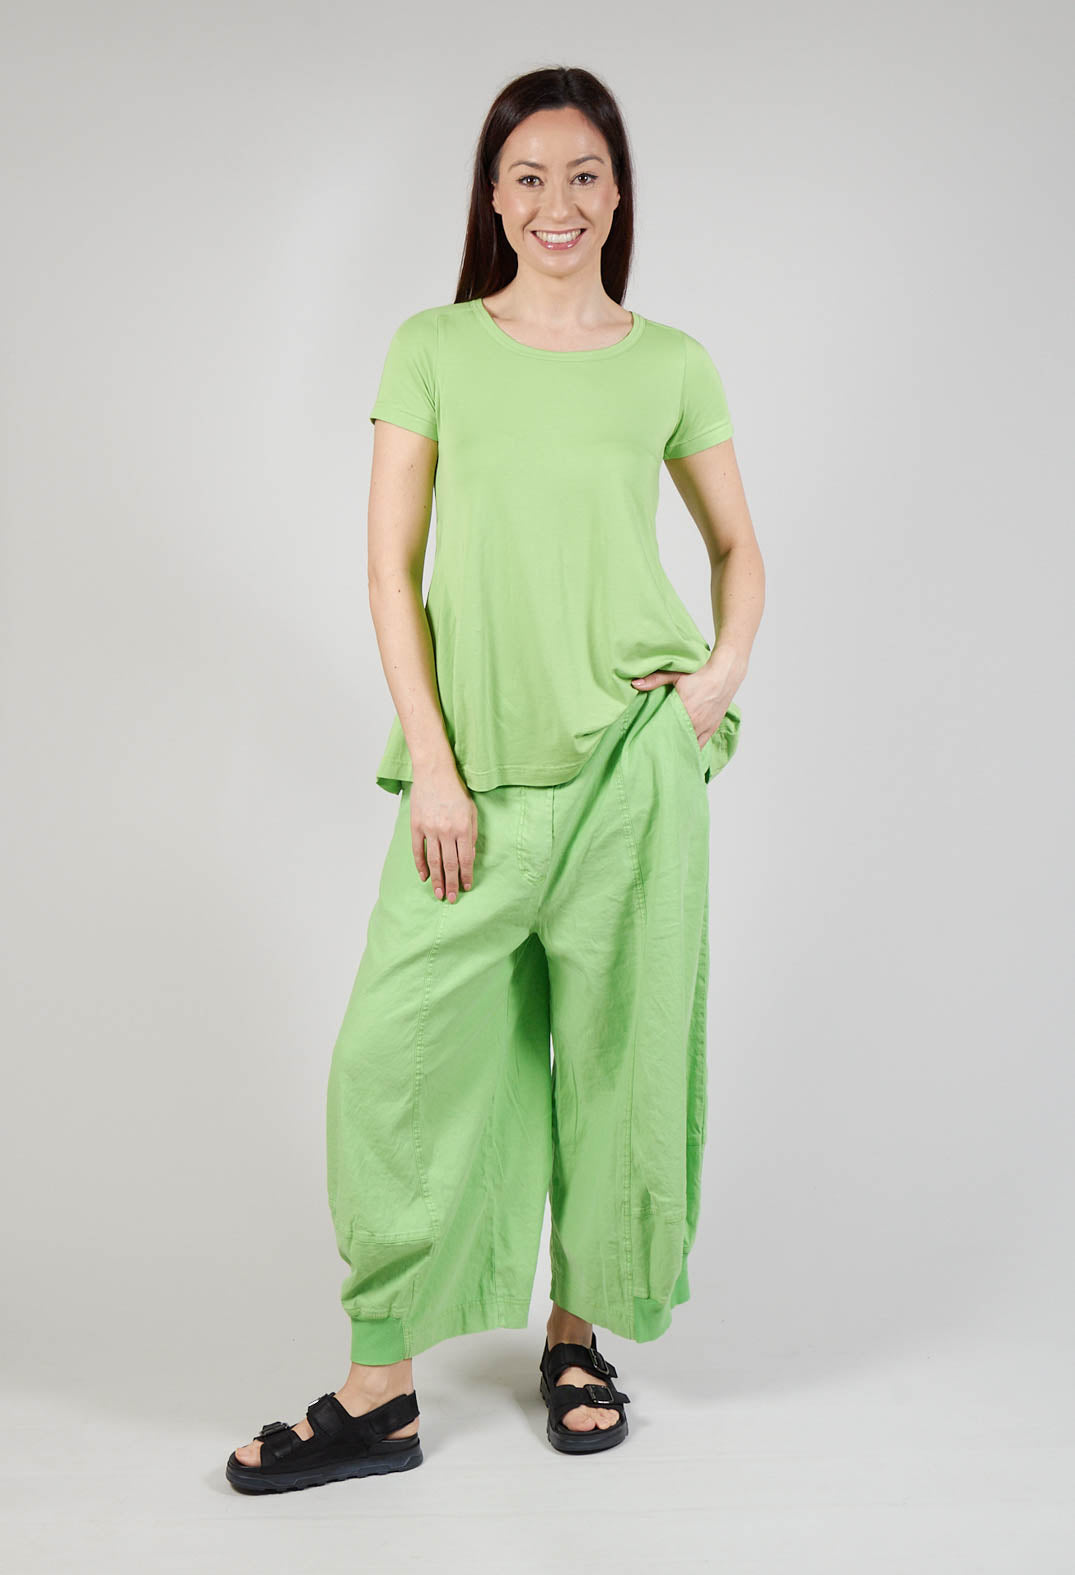 Balloon Leg Trousers in Lime